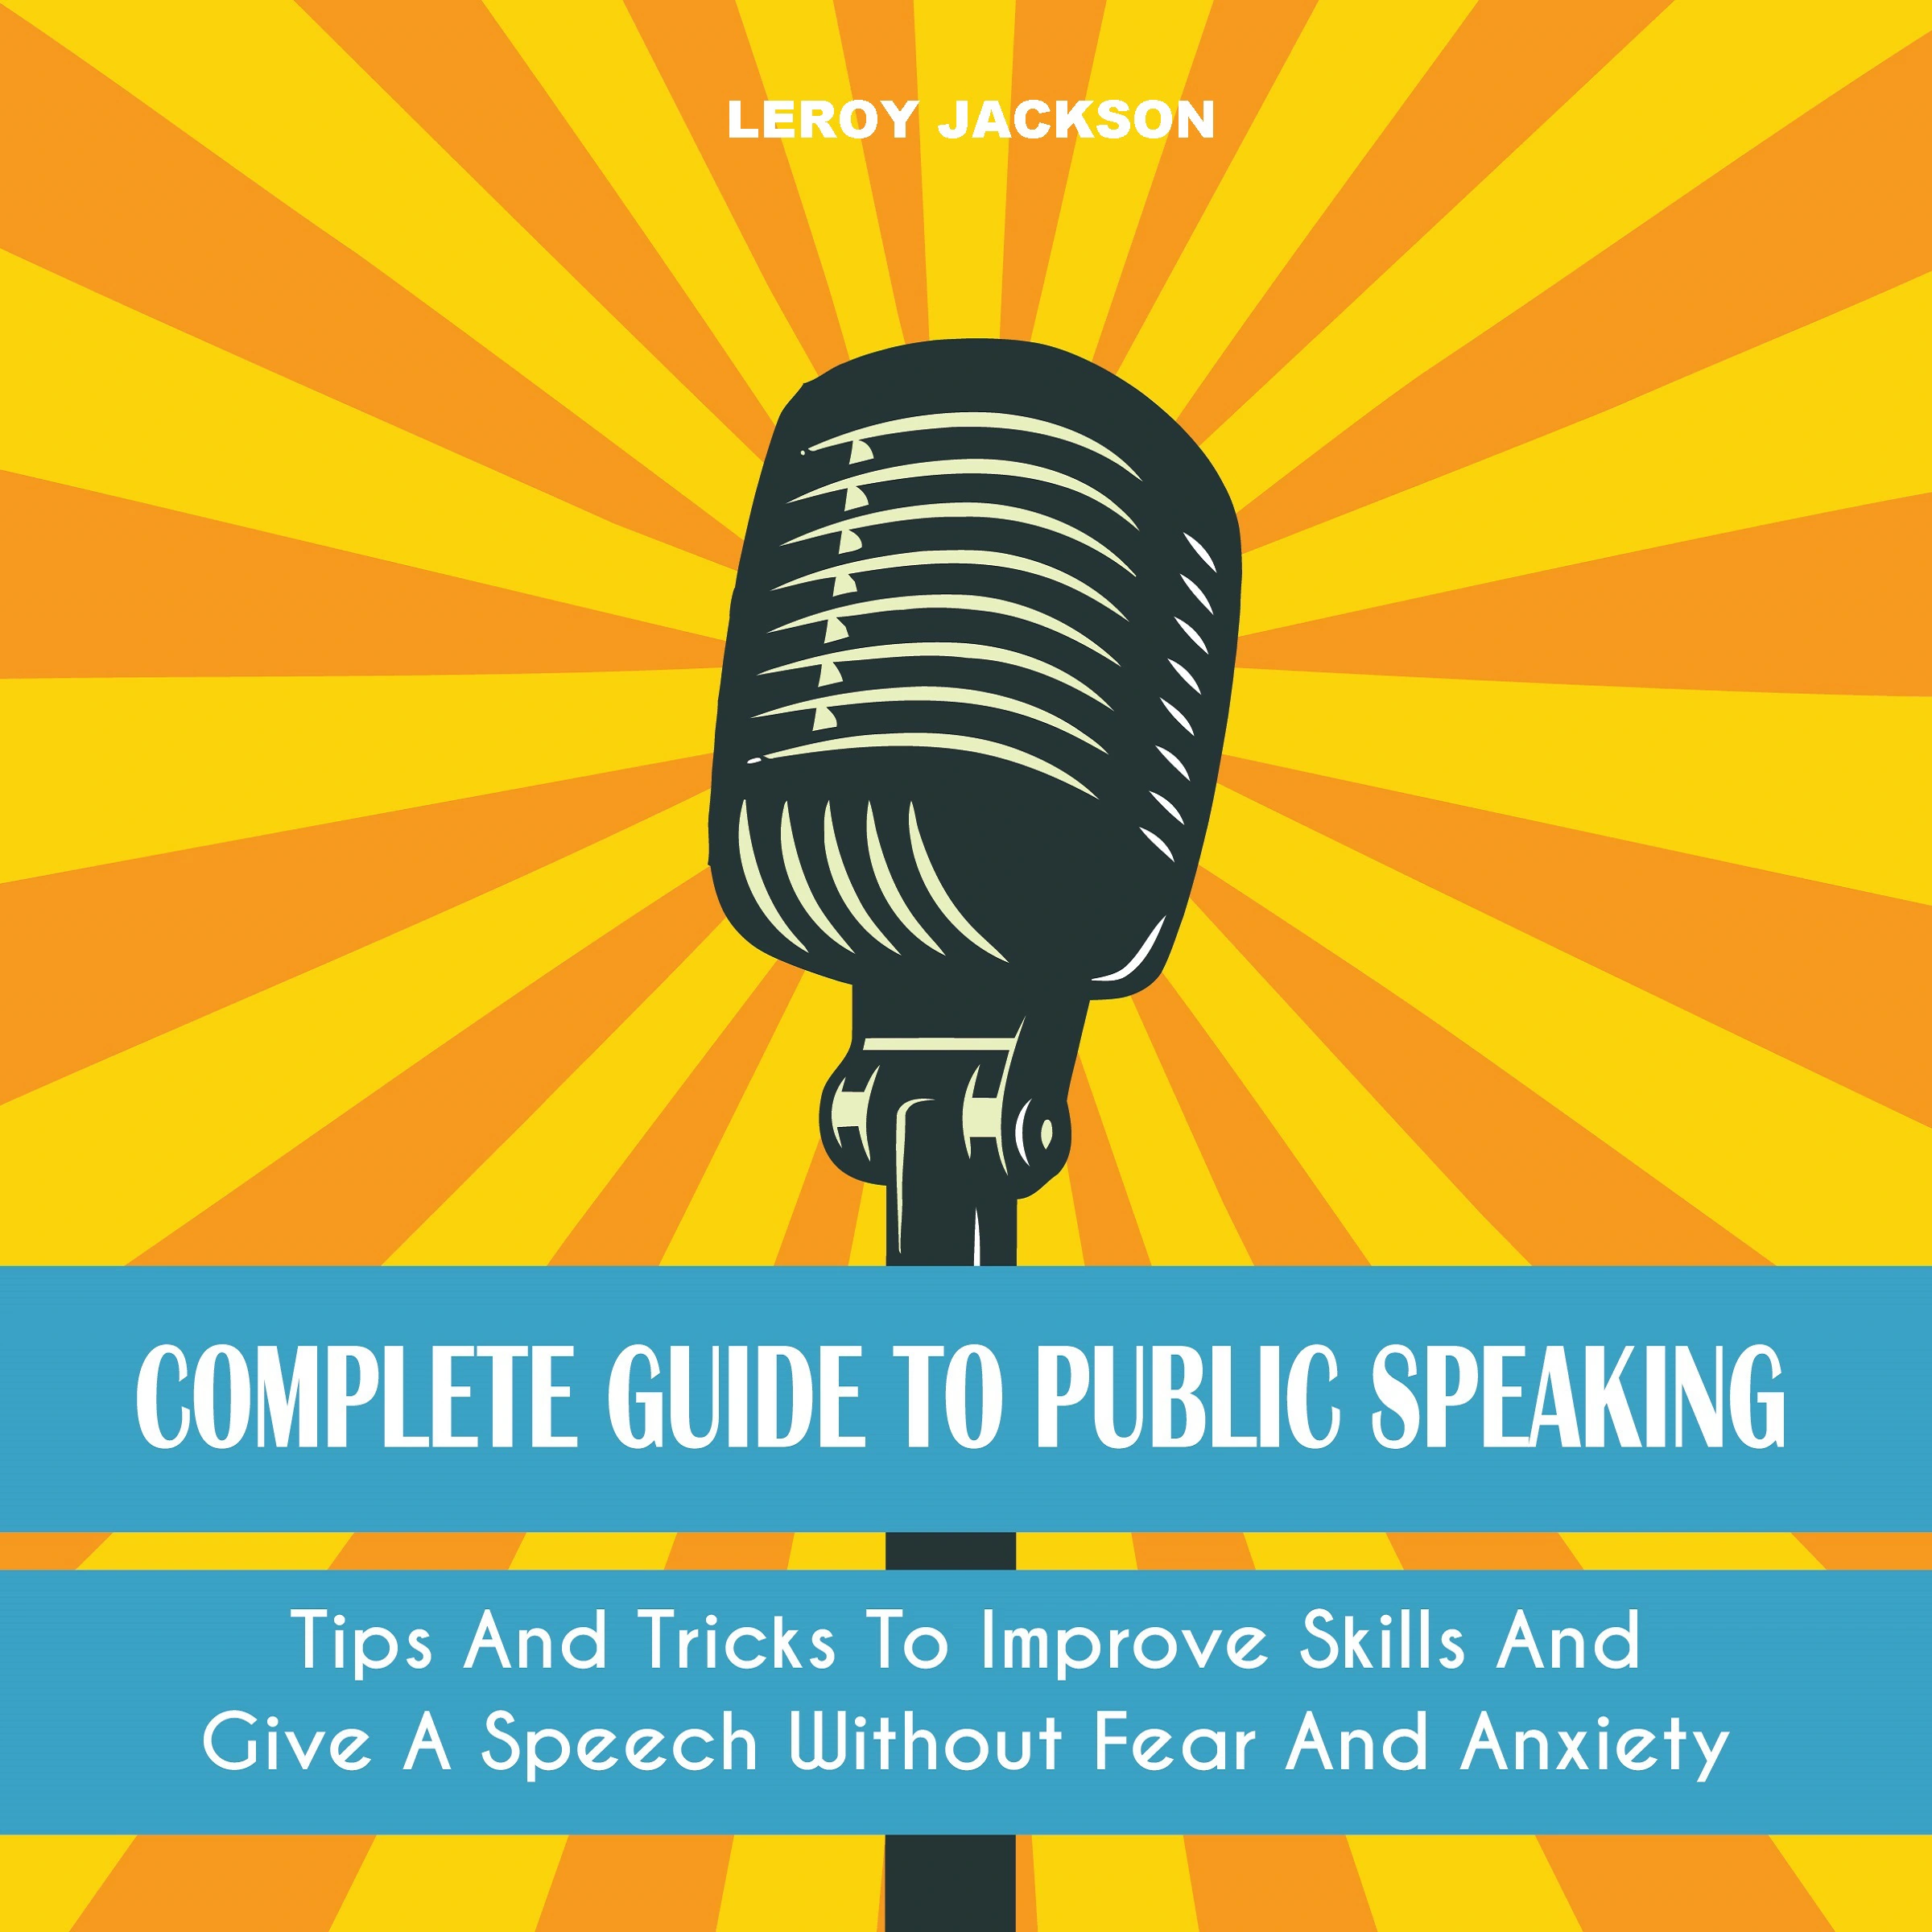 Complete Guide to Public Speaking Audiobook by Leroy Jackson